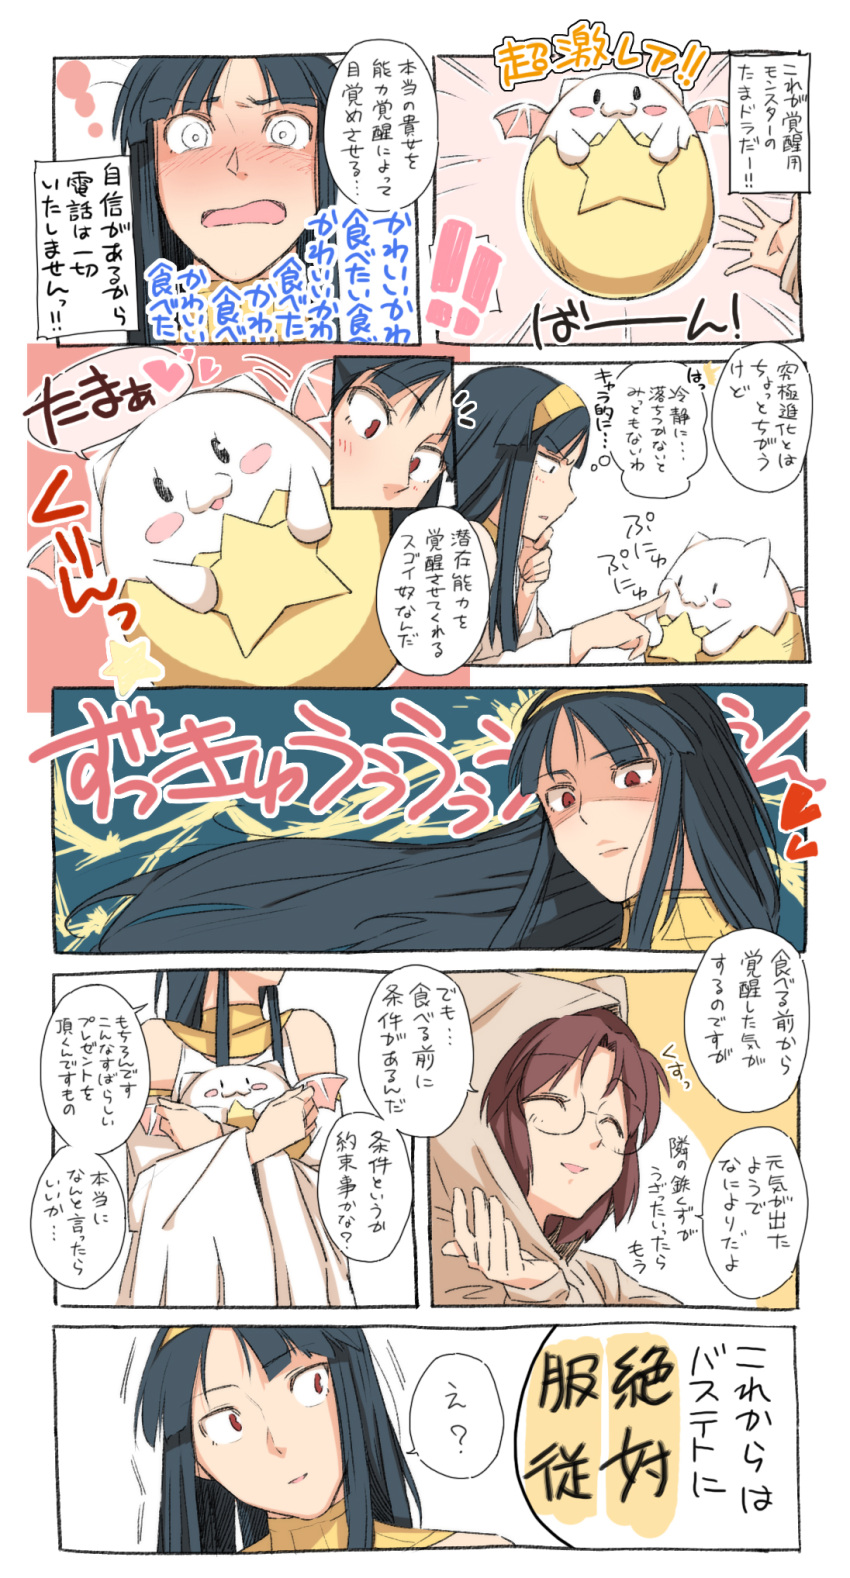 !! 2girls :3 ^_^ aiba-tsukiko black_hair blush blush_stickers brown_hair cheek_poking closed_eyes comic glasses hairband heart highres hug isis_(p&amp;d) multiple_girls open_mouth puzzle_&amp;_dragons red_eyes star tamadra translation_request wings